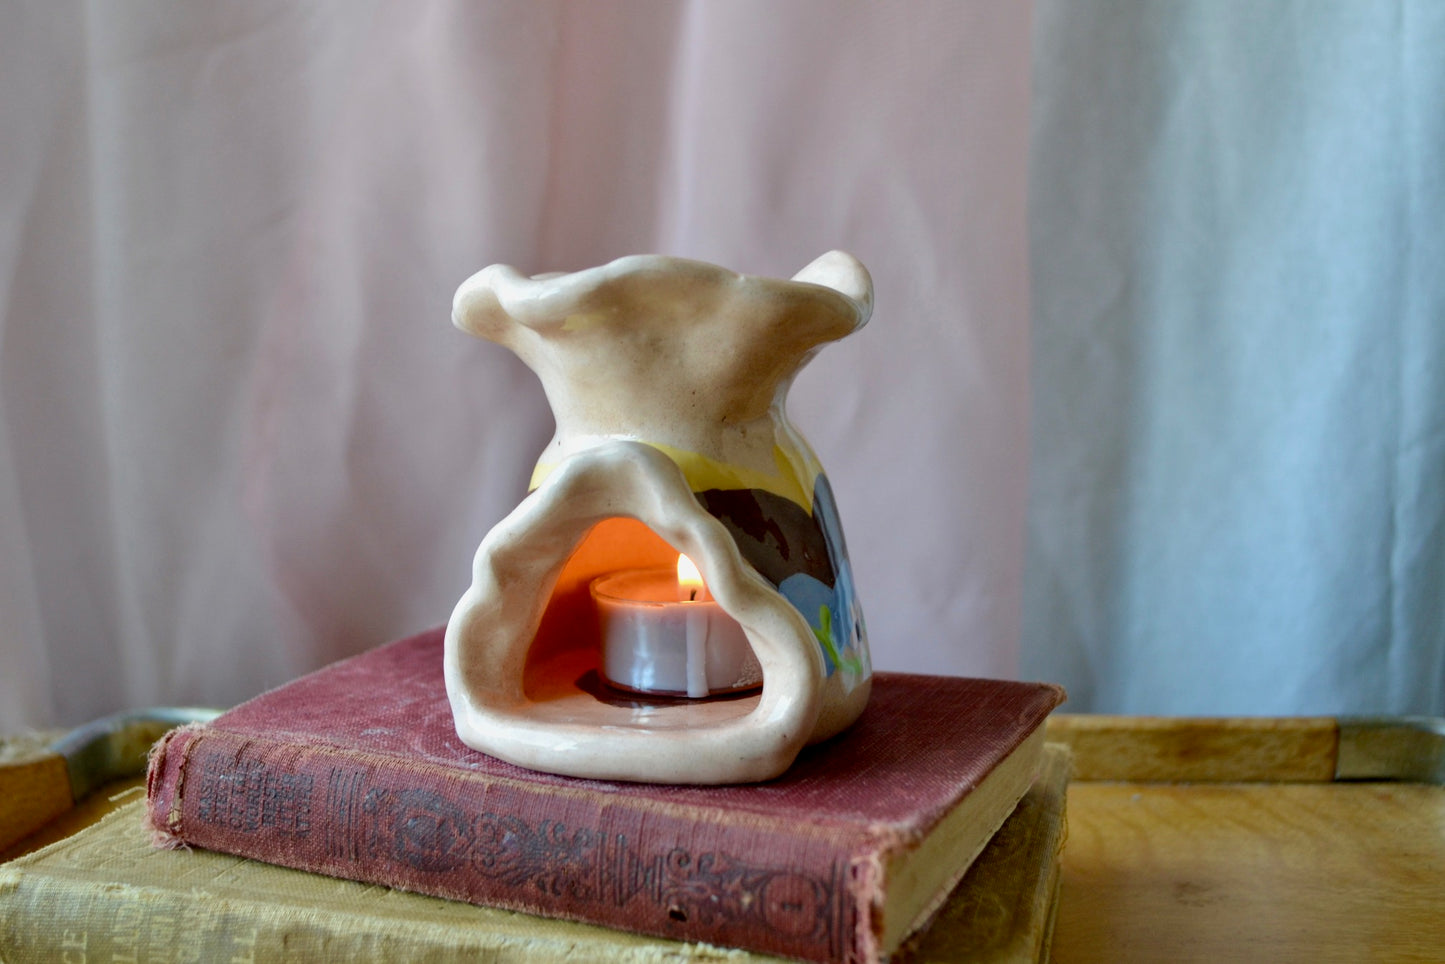 Hand Sculpted and Painted Ceramic Tealight Holder/ Cone Incense Burner